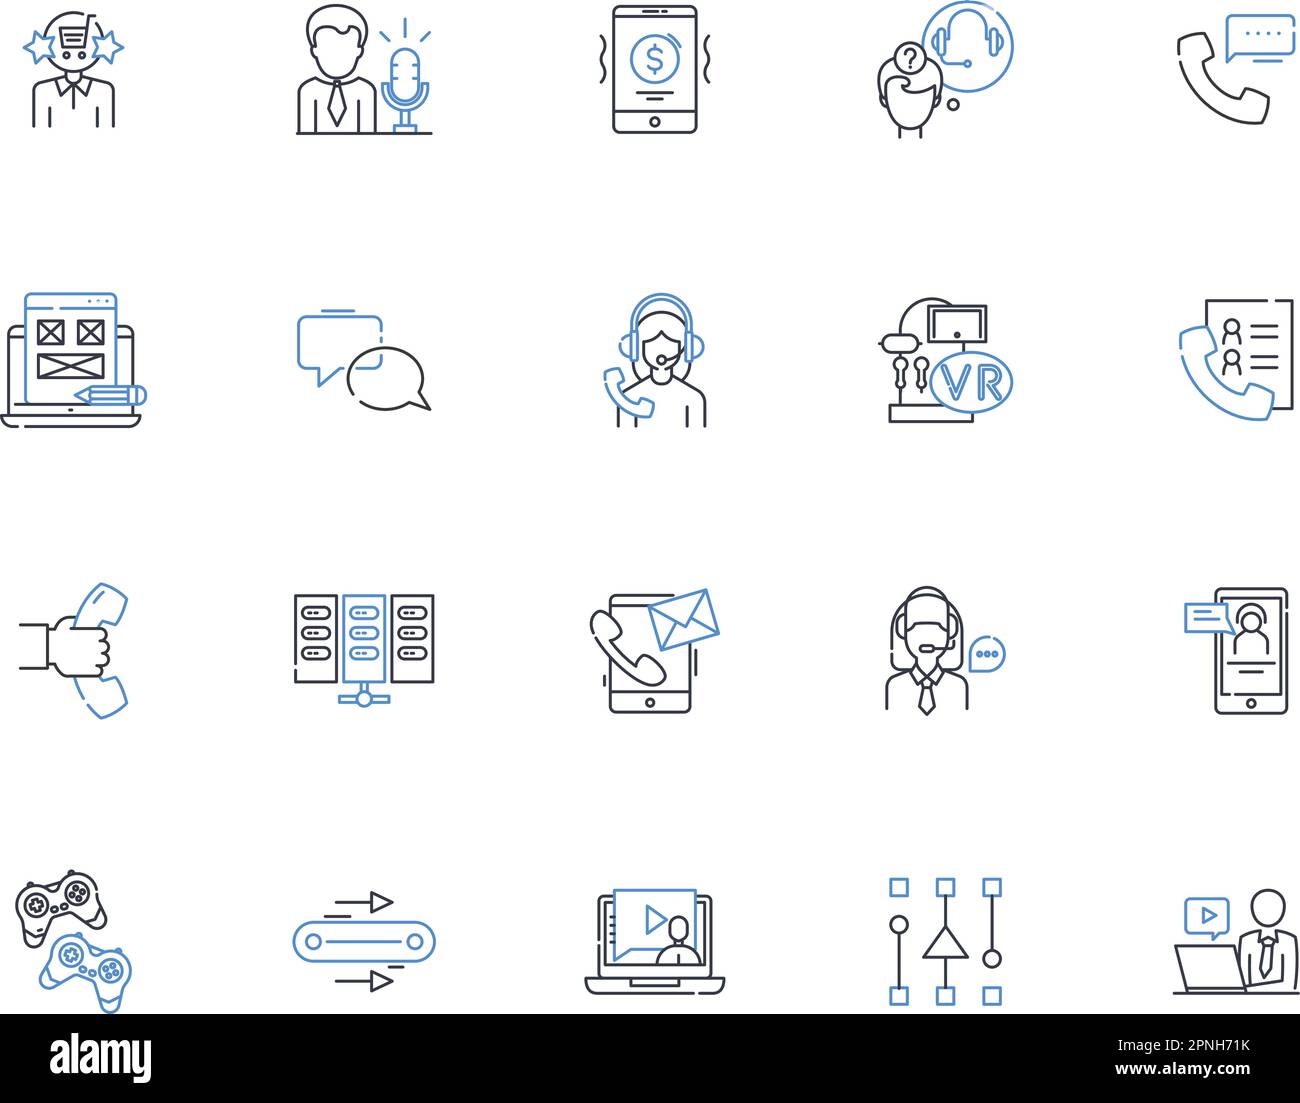 Clang line icons collection. Compiler, Object-oriented, Fast, Command-line, Open-source, C++, Debugging vector and linear illustration. Parsing,LLVM Stock Vector